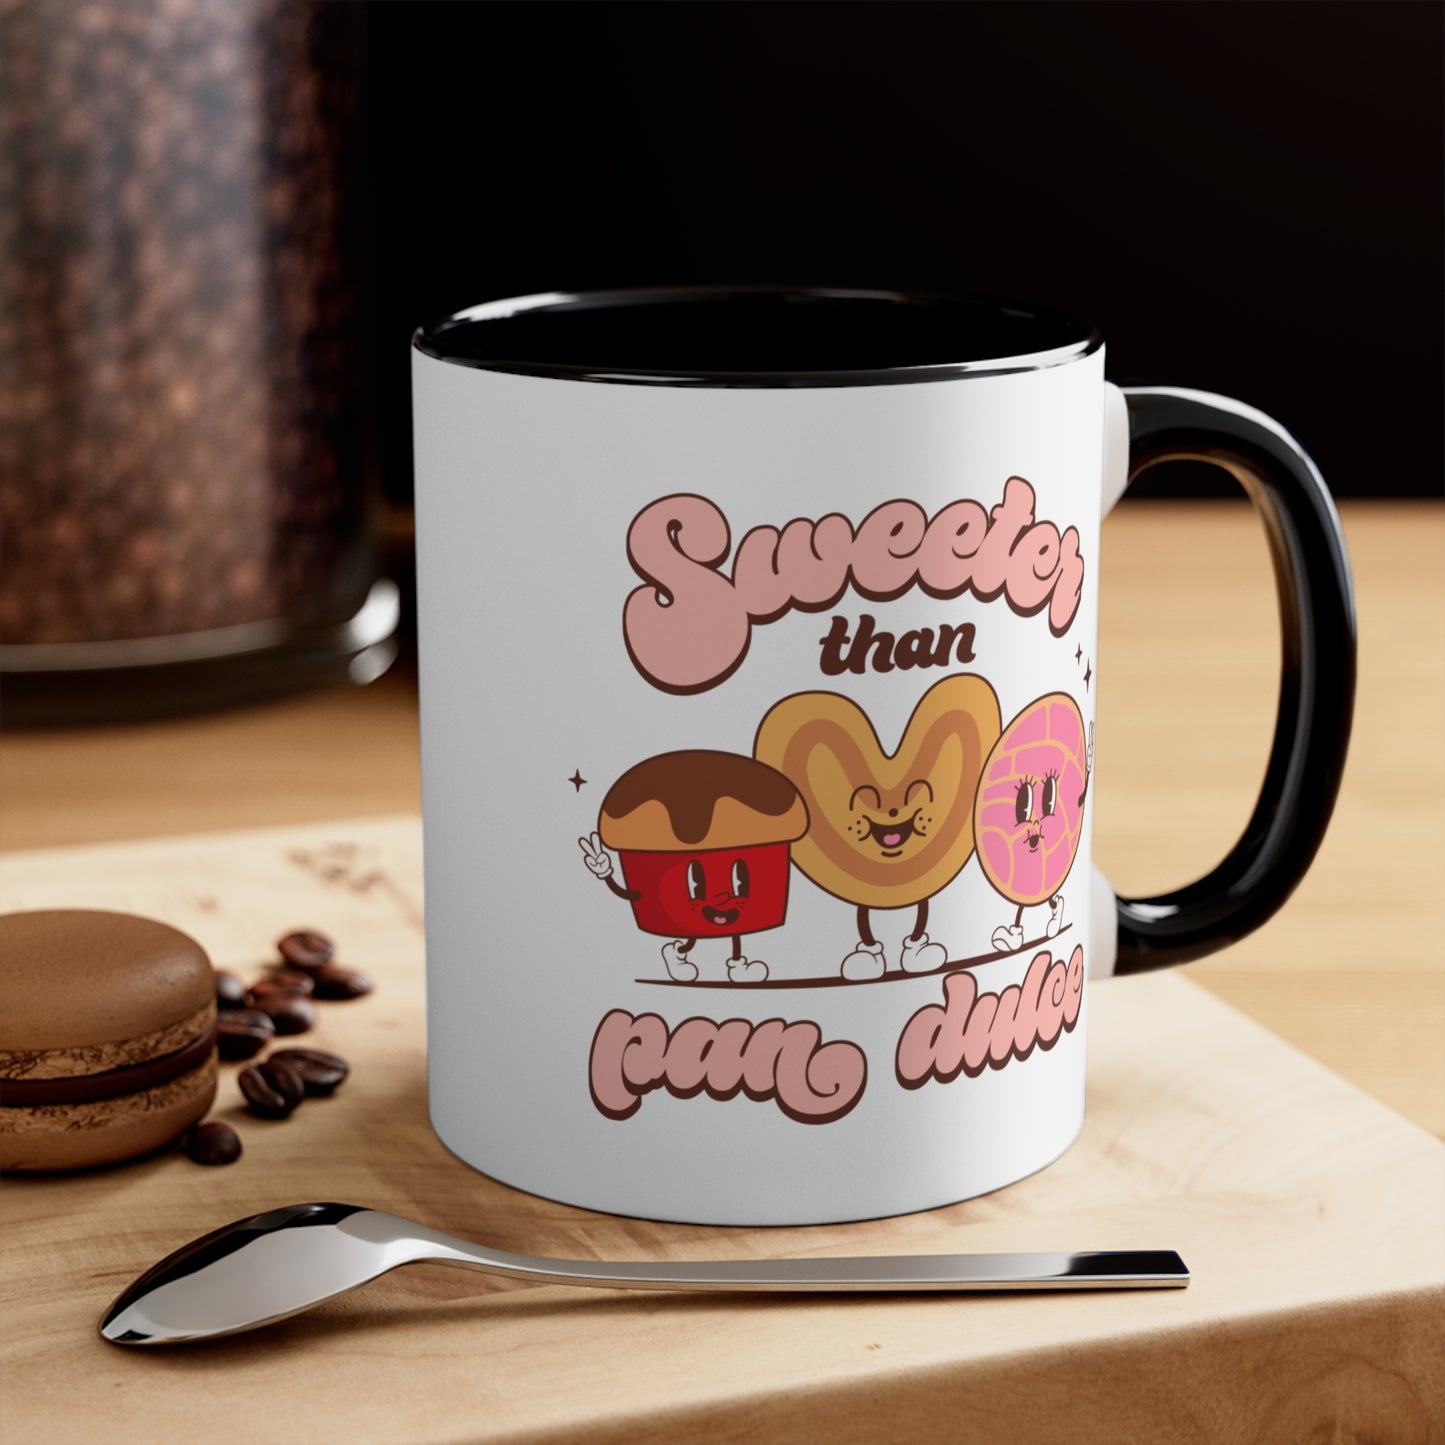 Sweeter than pan dulce Coffee Mug, 11oz for Mexican mom, Mexican friend or Mexican family.